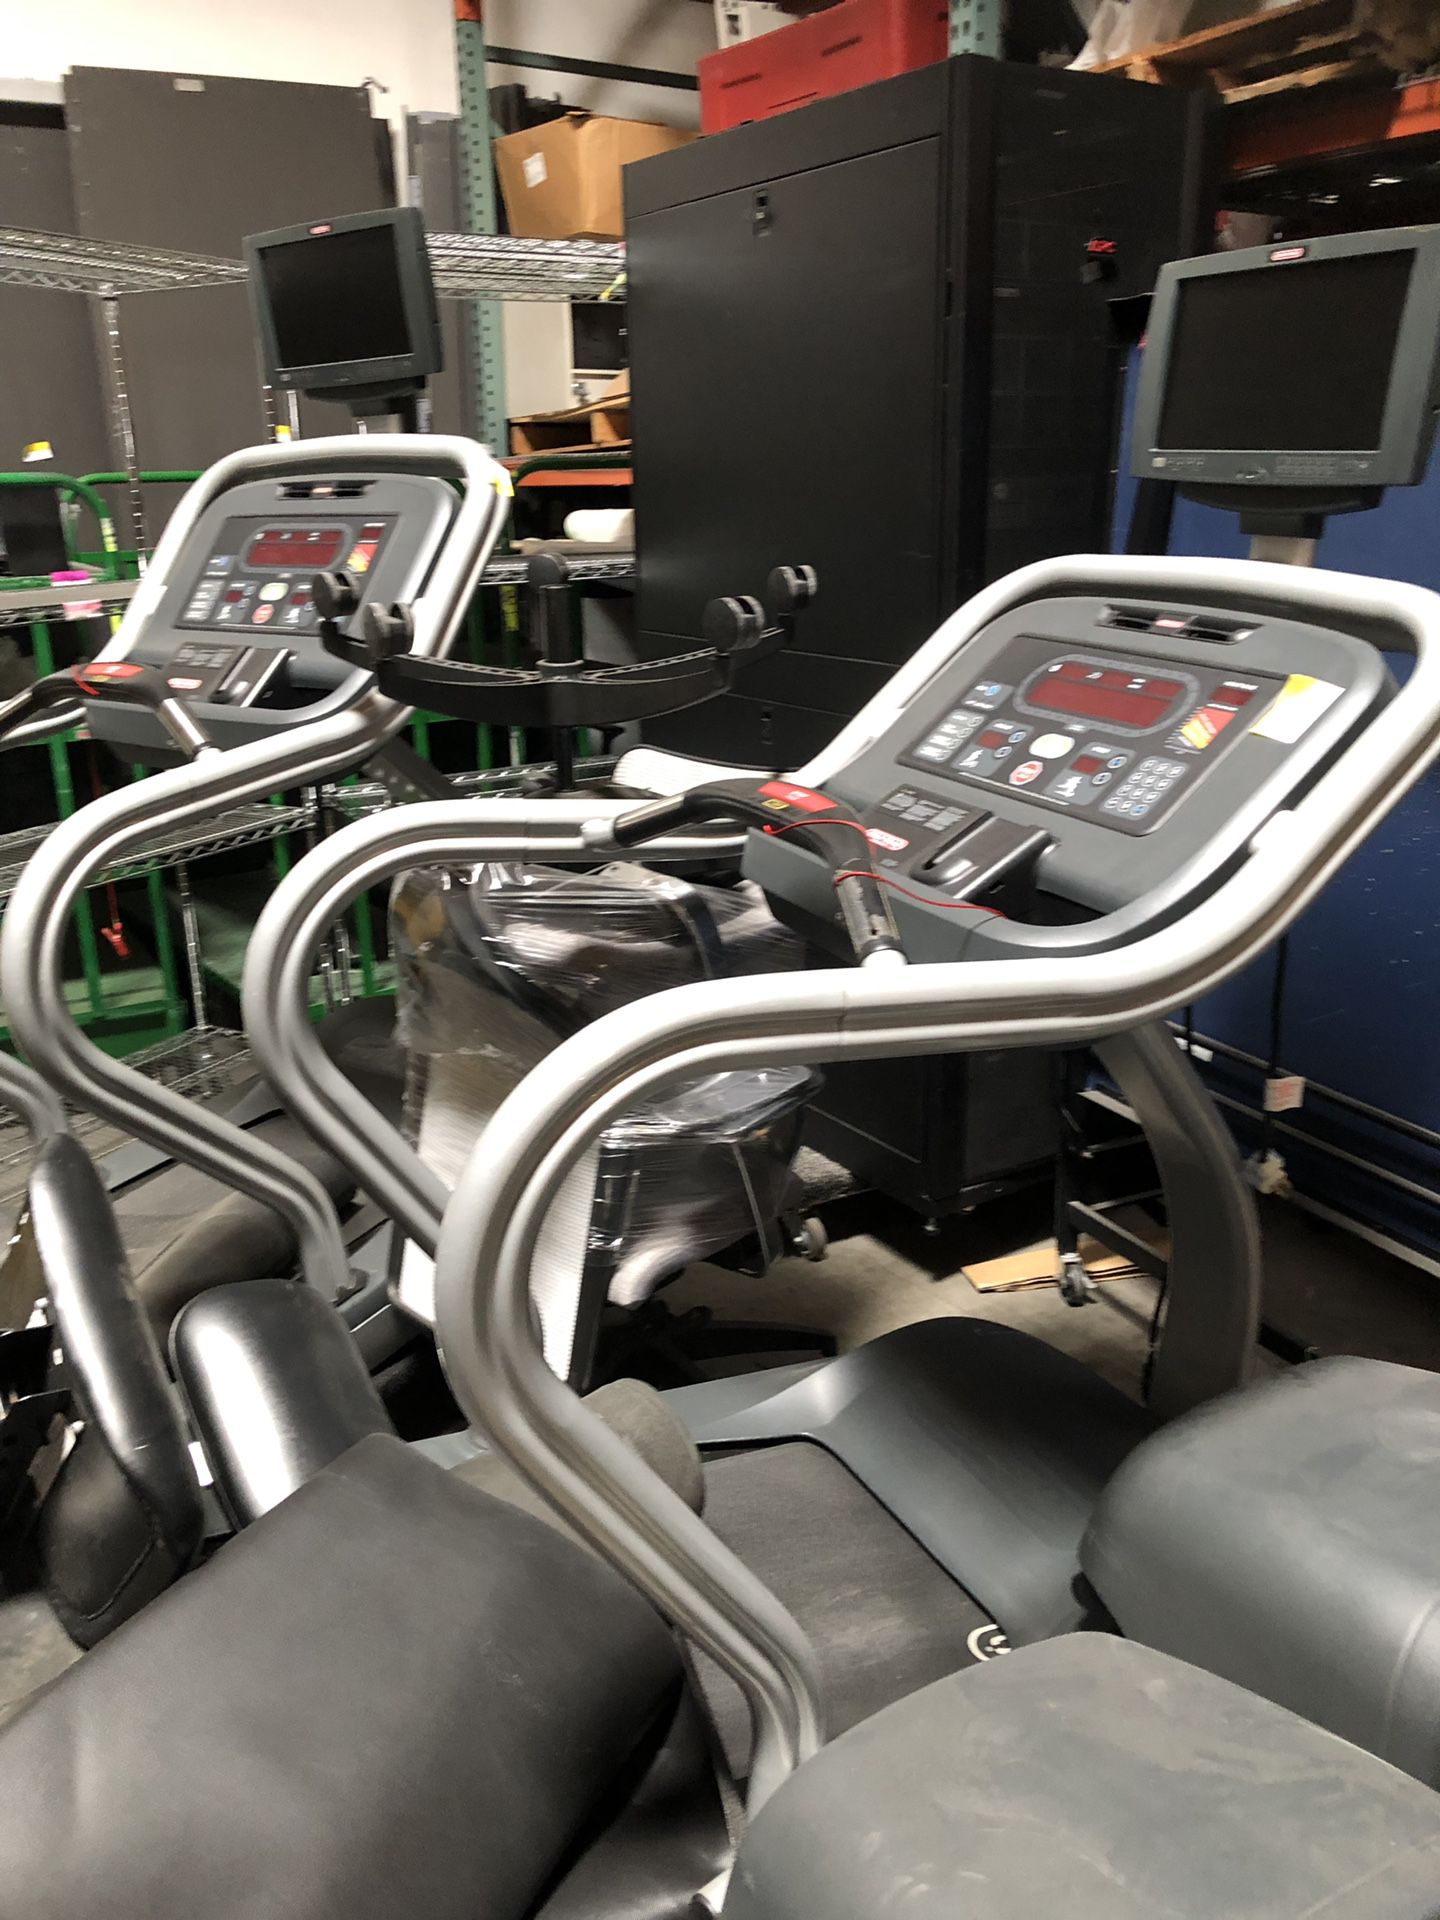 Star trac treadmill’s .....2 of them....cheap!!! Update!!!! Only 1 is left...get it now